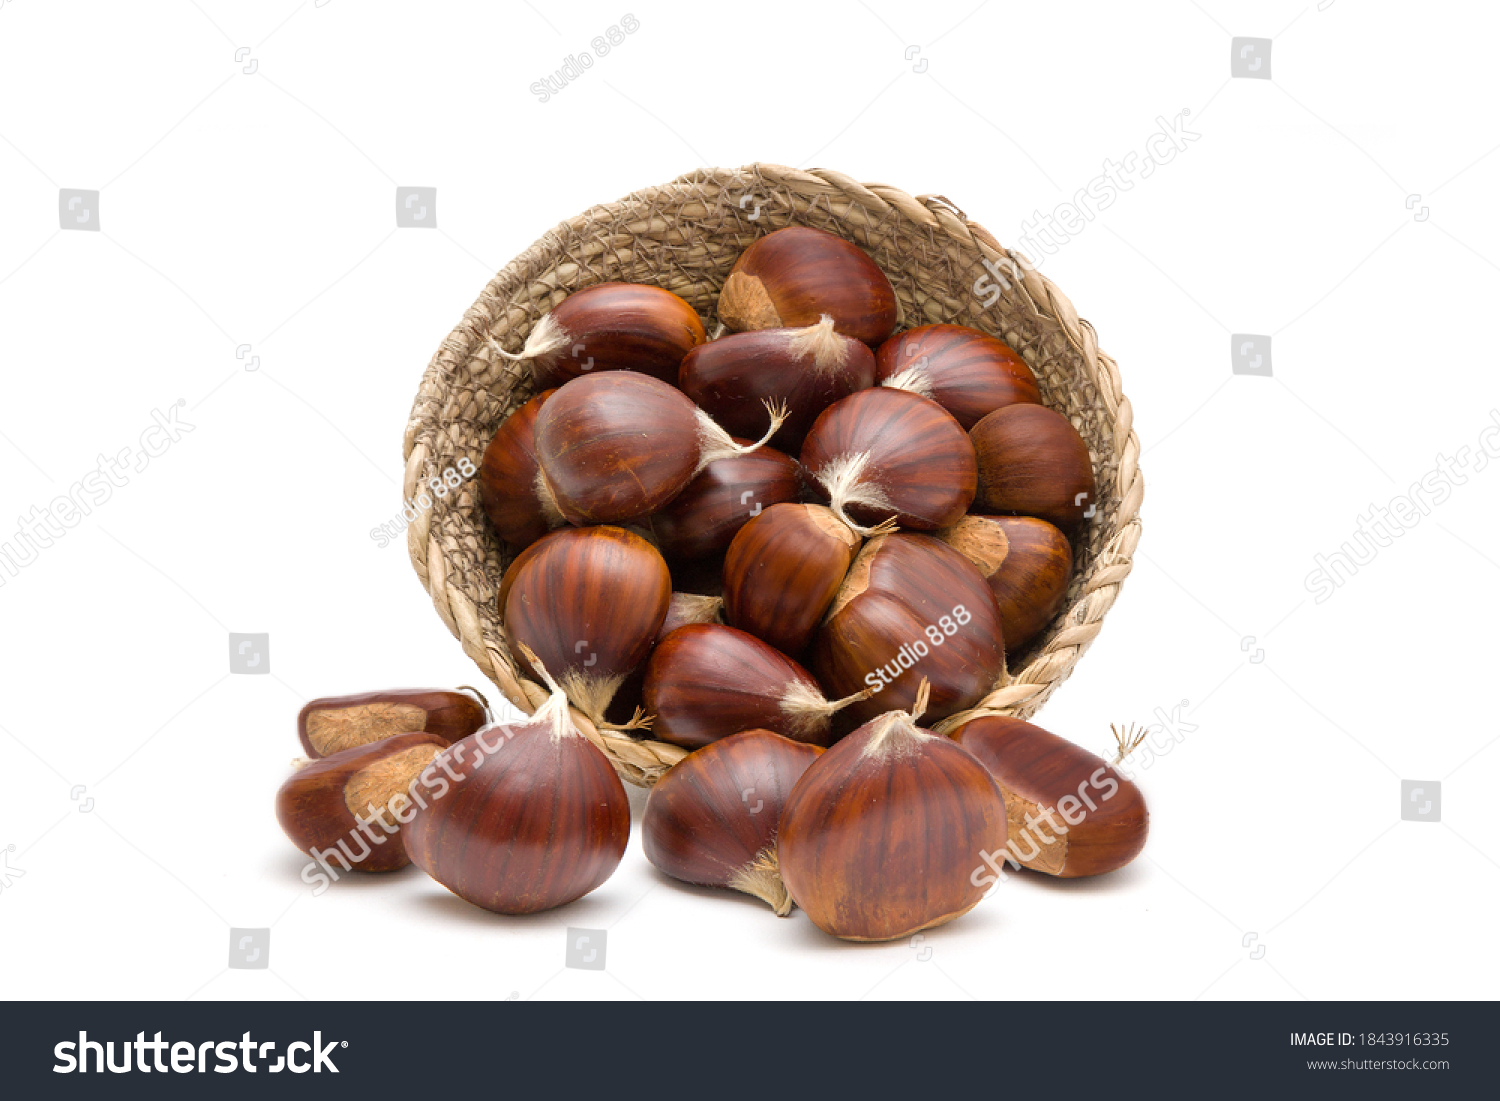 Fresh raw sweet chestnuts(Castanea sativa) in a wicker basket isolated on a white background #1843916335